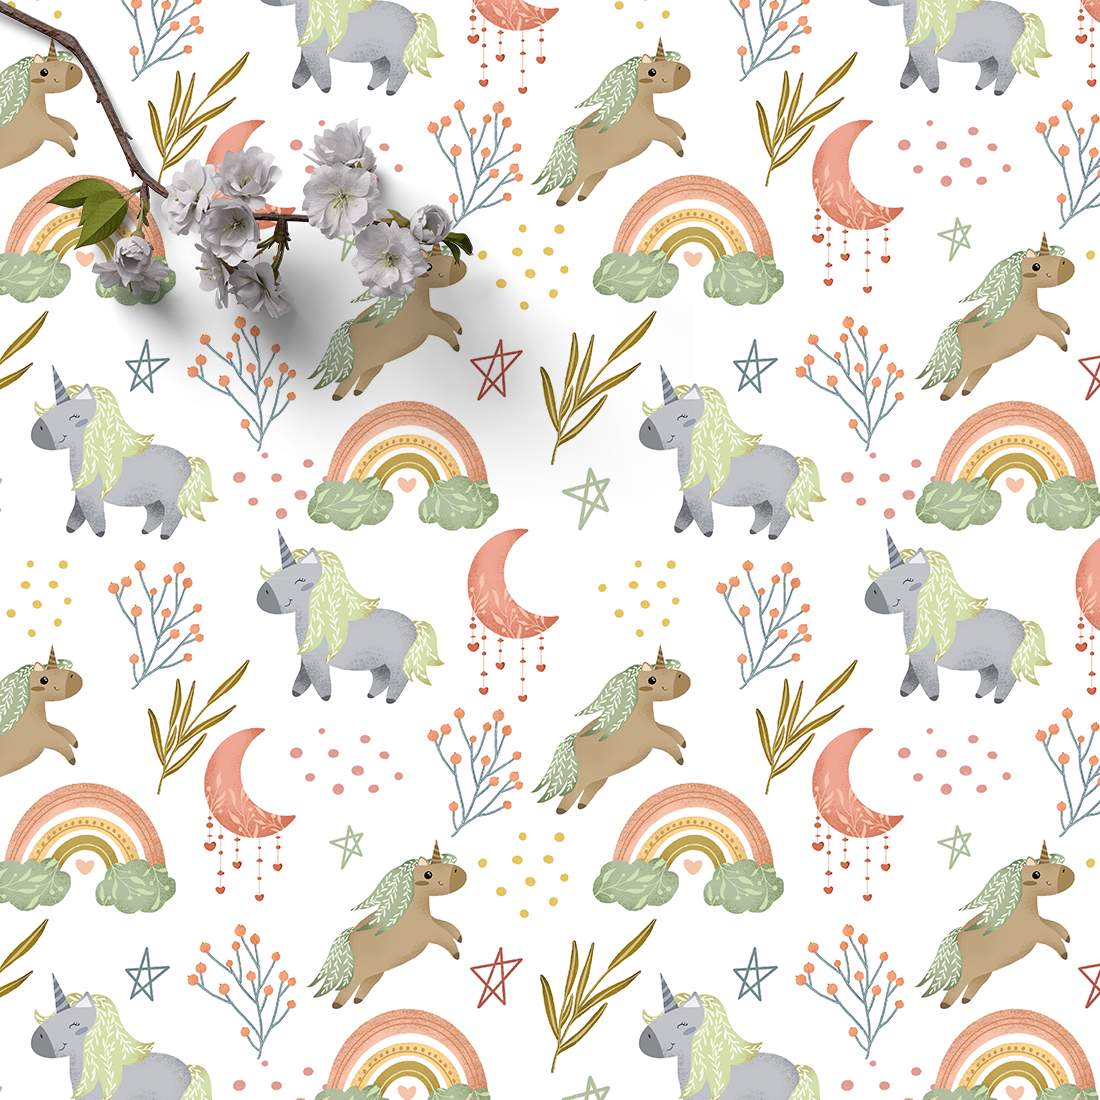 "Magical" unicorn & rainbow seamless patterns preview image.